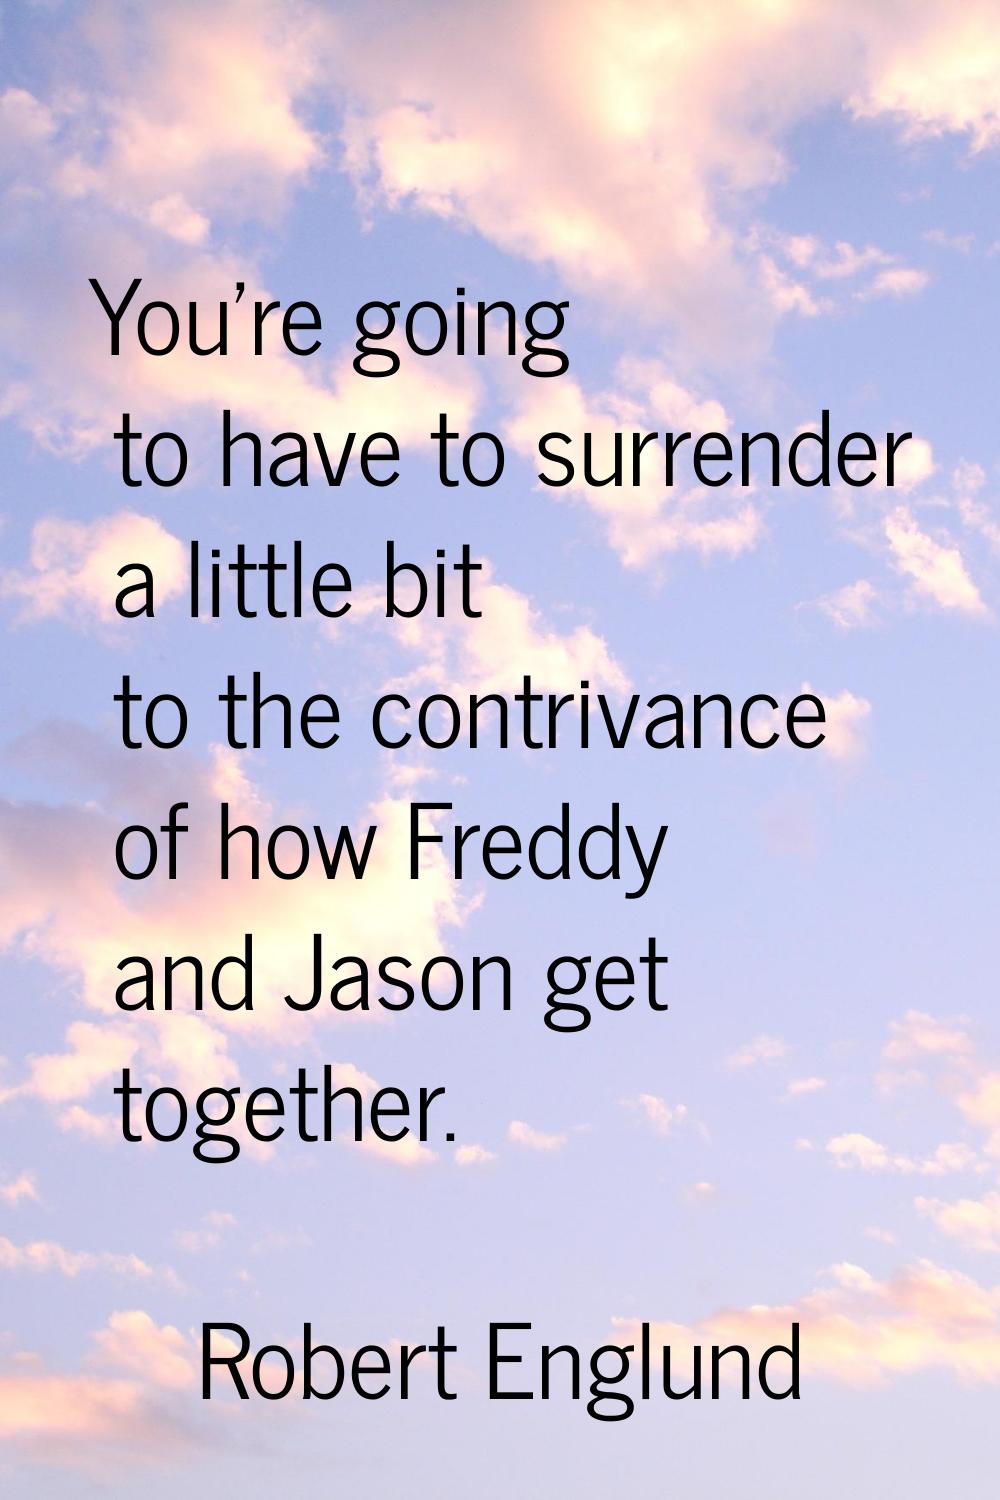 You're going to have to surrender a little bit to the contrivance of how Freddy and Jason get toget